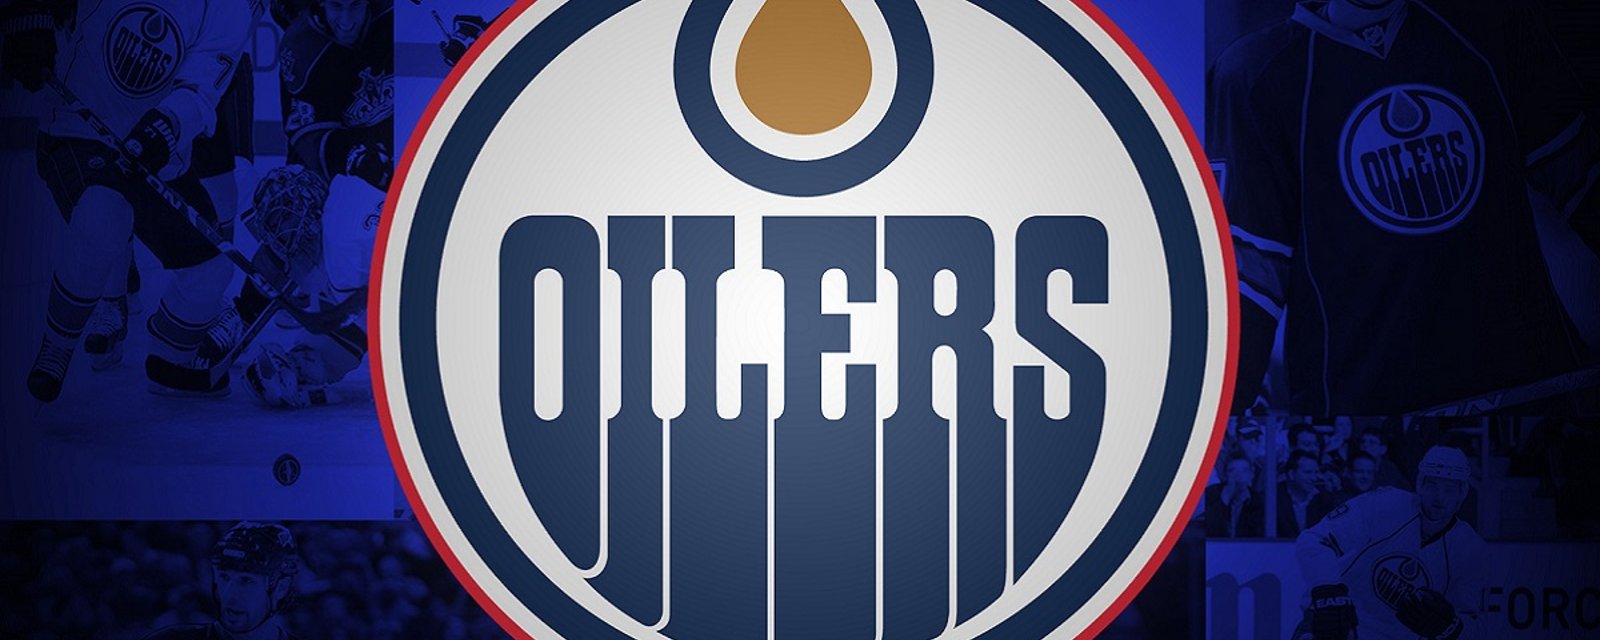 Breaking: Oilers sign first round pick on Thursday.